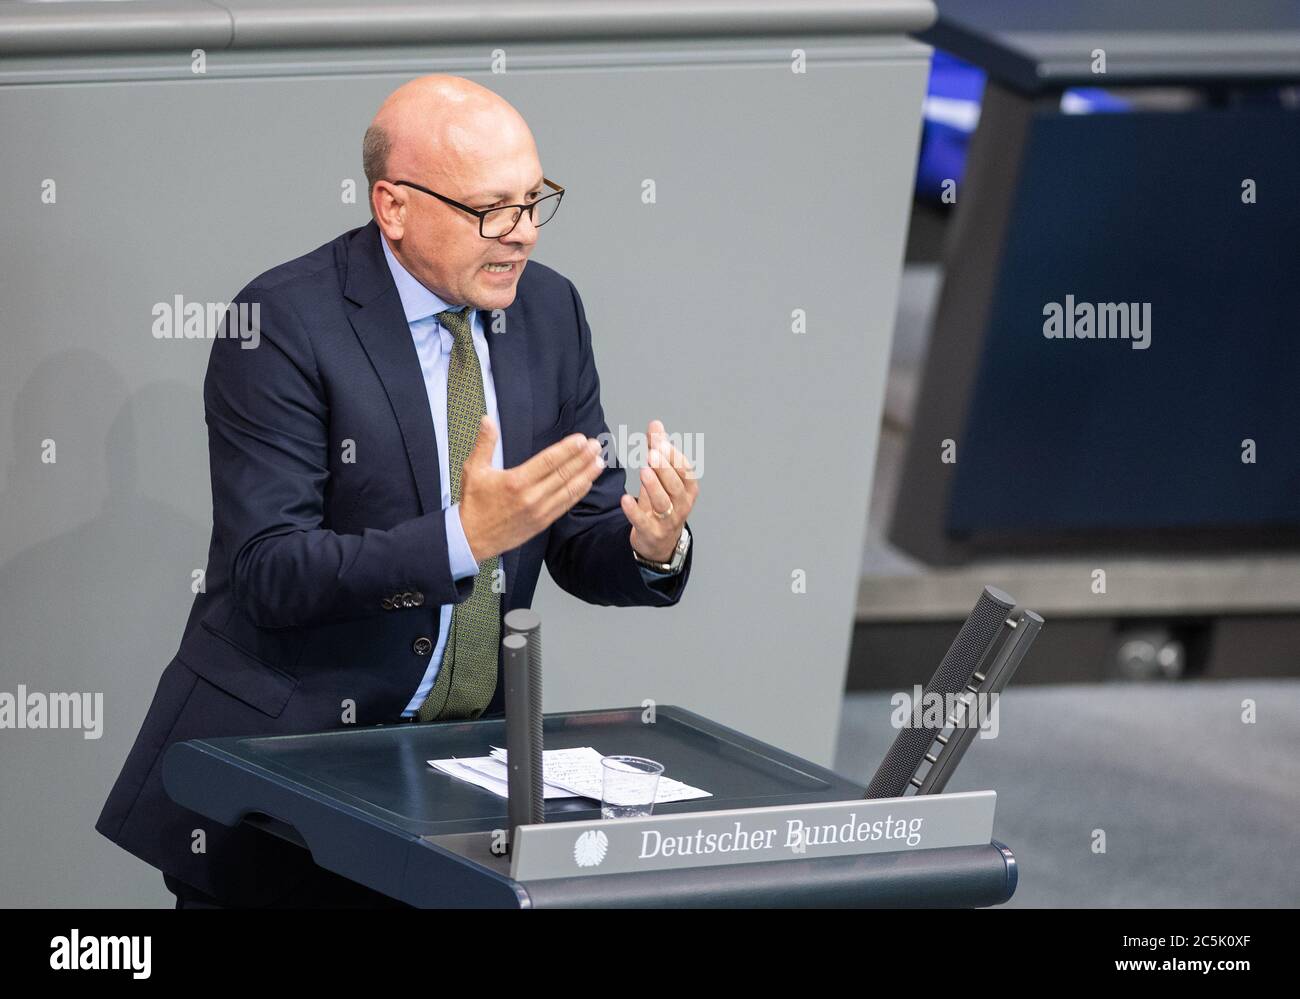 Berlin, Germany. 03rd July, 2020. Alexander Throm (CDU) speaks in the plenary session of the German Bundestag. The main topics of the 171st session of the 19th legislative period are the adoption of the Coal Exit Act, a topical hour on the excesses of violence in Stuttgart, as well as debates on electoral law reform, the protection of electronic patient data, the welfare of farm animals and the German chairmanship of the UN Security Council. Credit: Christophe Gateau/dpa/Alamy Live News Stock Photo